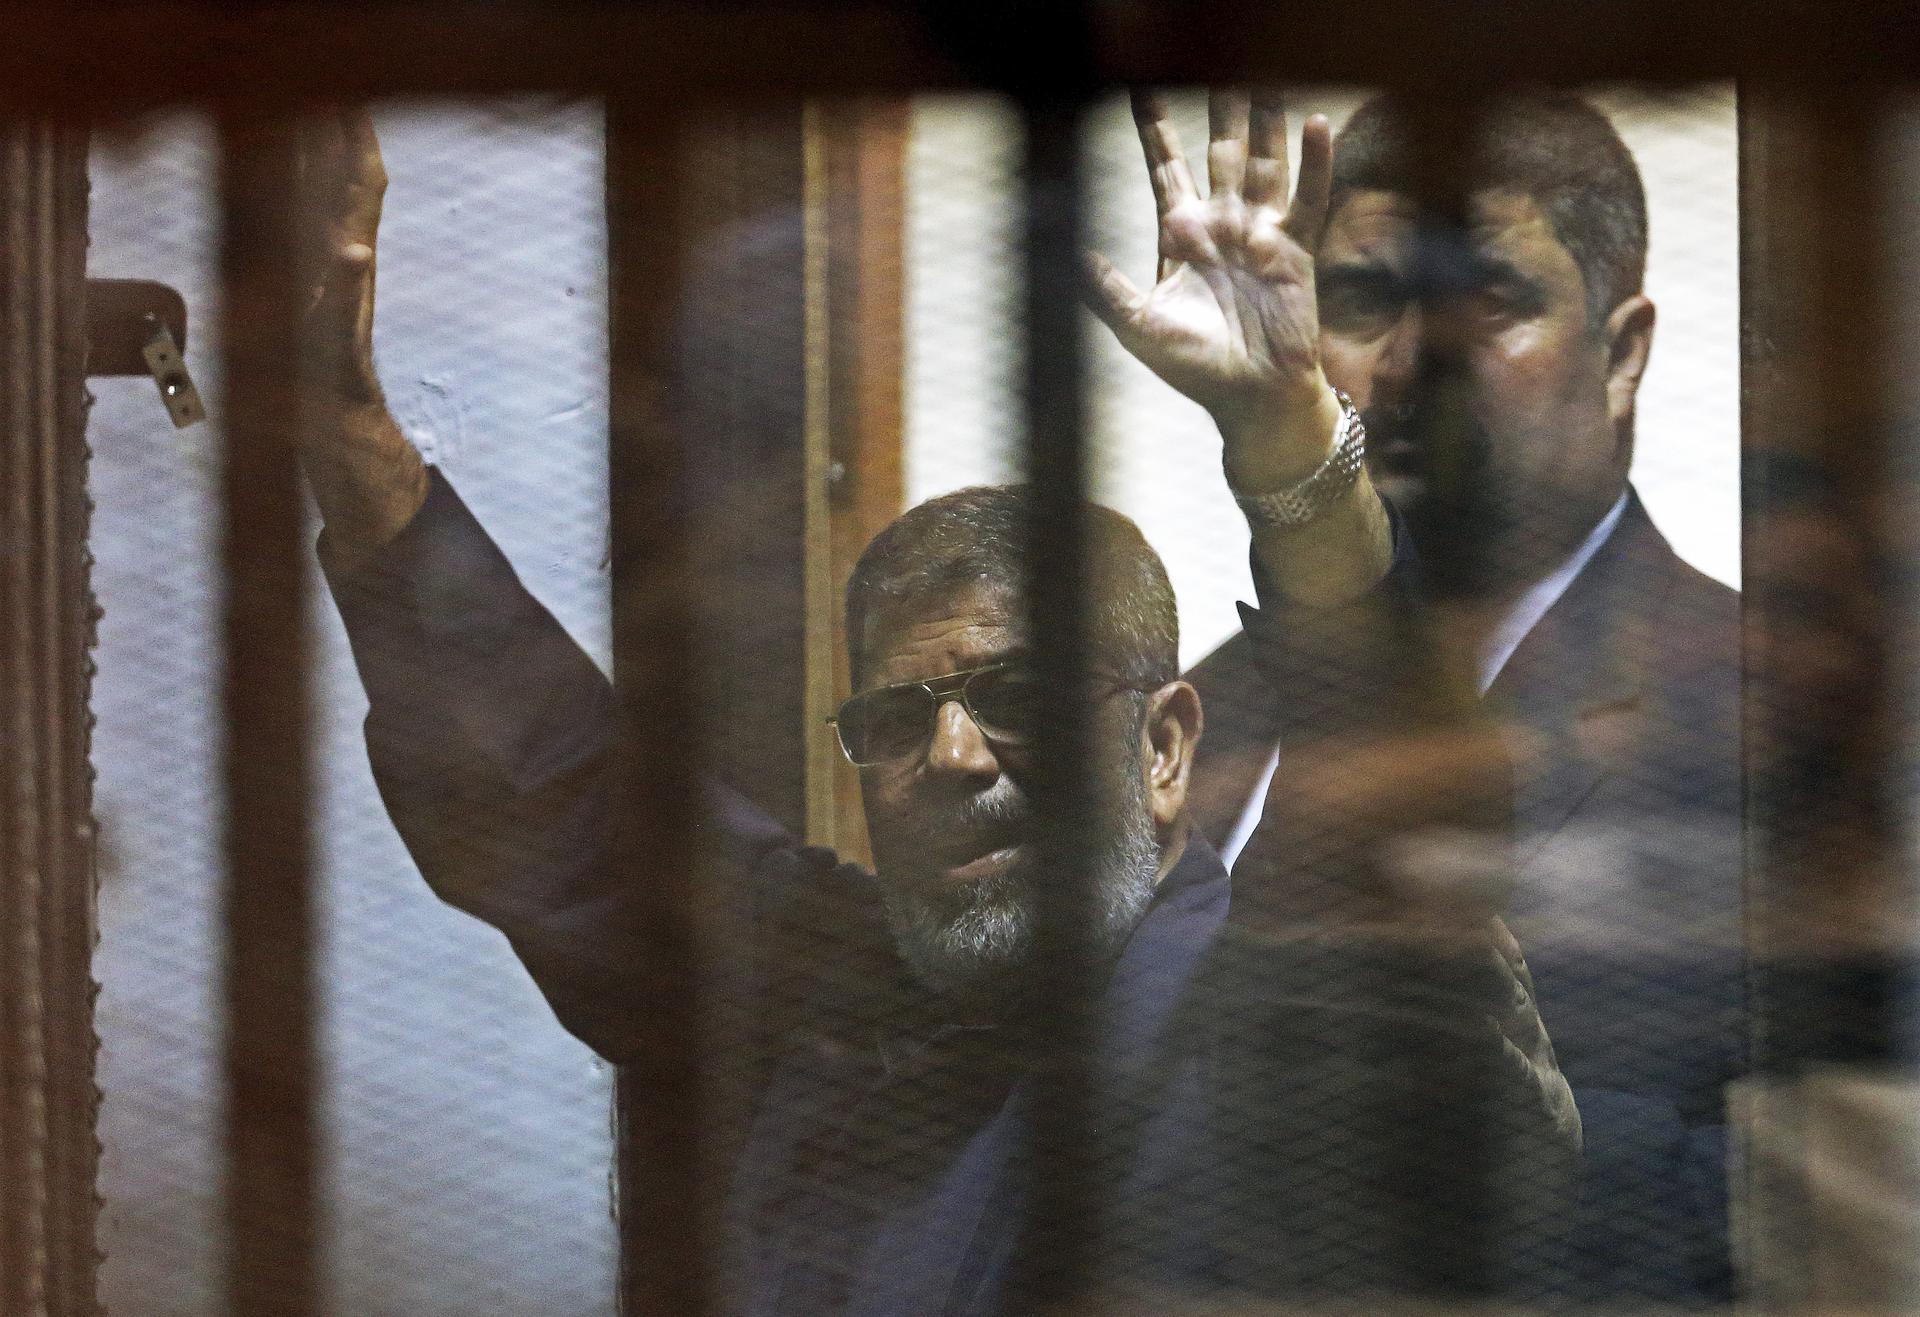 Deposed Egyptian President Mohamed Morsi greets his lawyers and people from behind bars after his verdict at a court on the outskirts of Cairo, Egypt on June 16, 2015.